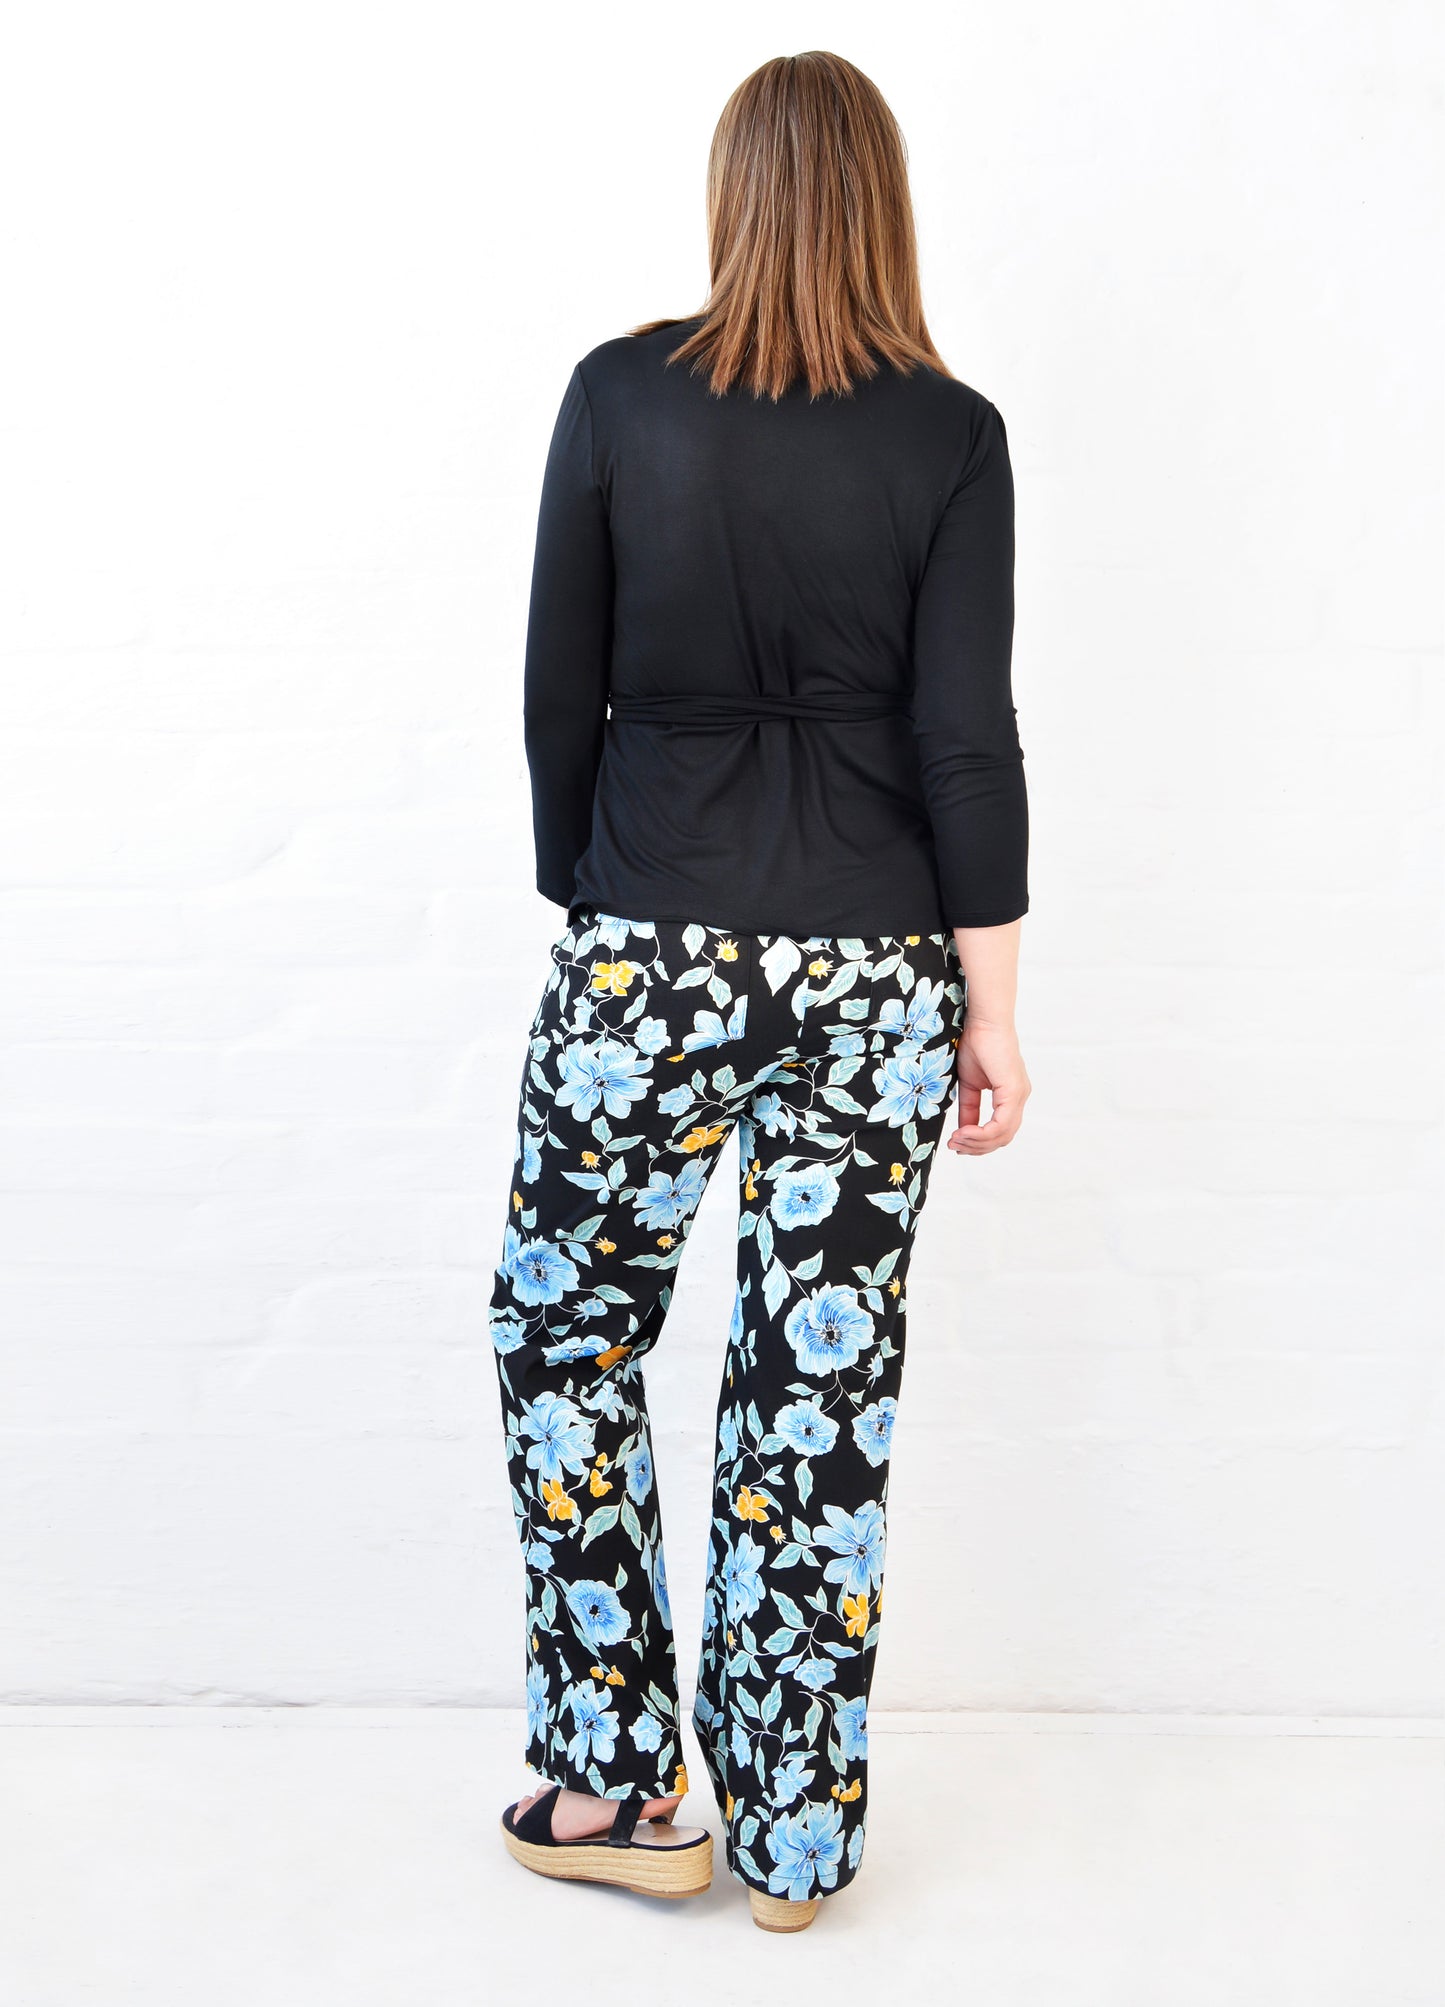 Jessica trousers in black Poppies print size 36